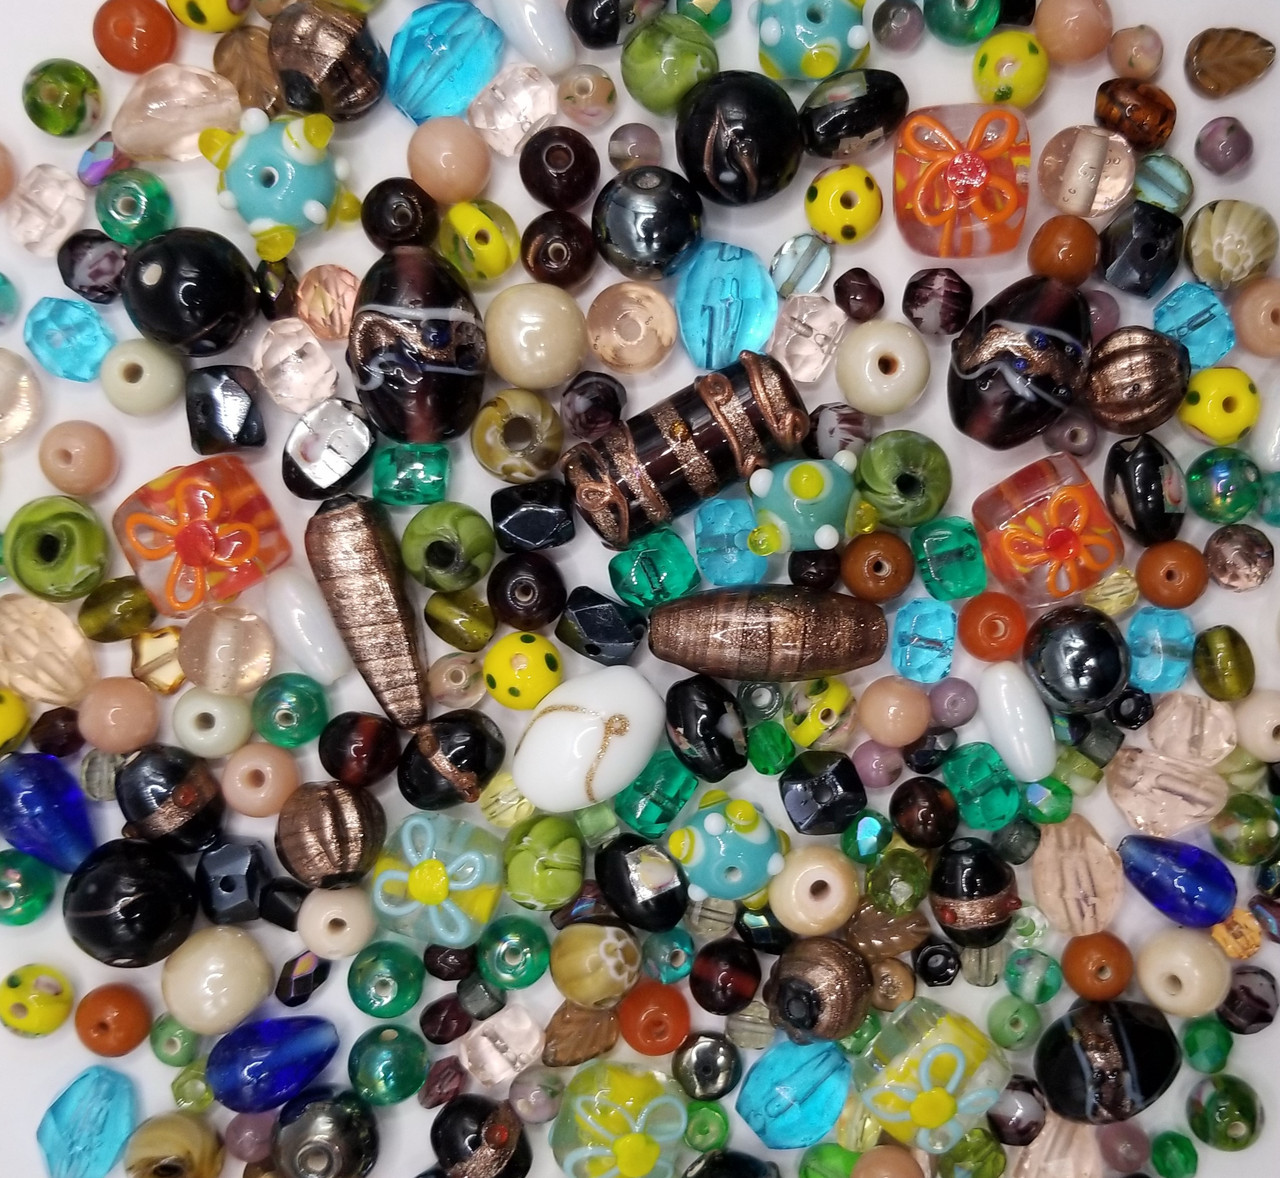 1 Pound Assorted Glass Beads for Jewelry Making, DIY Lamp Work, Arts and Crafts, and Decorative Hobby Artistry, Colorful Crystal Assortment Bulk Mix